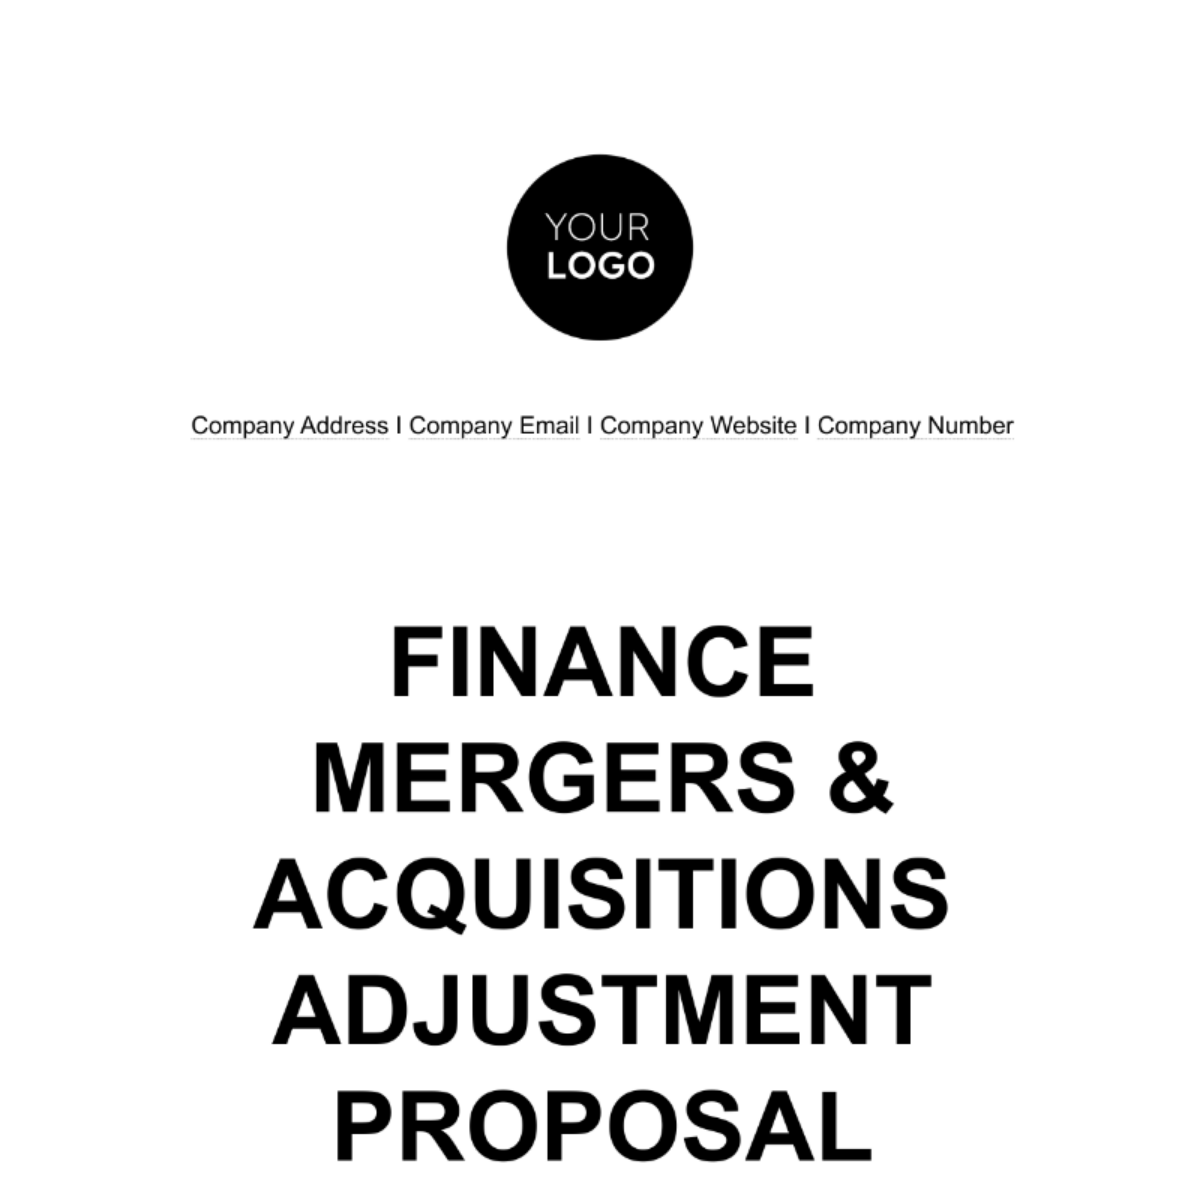 Free Finance Mergers & Acquisitions Adjustment Proposal Template